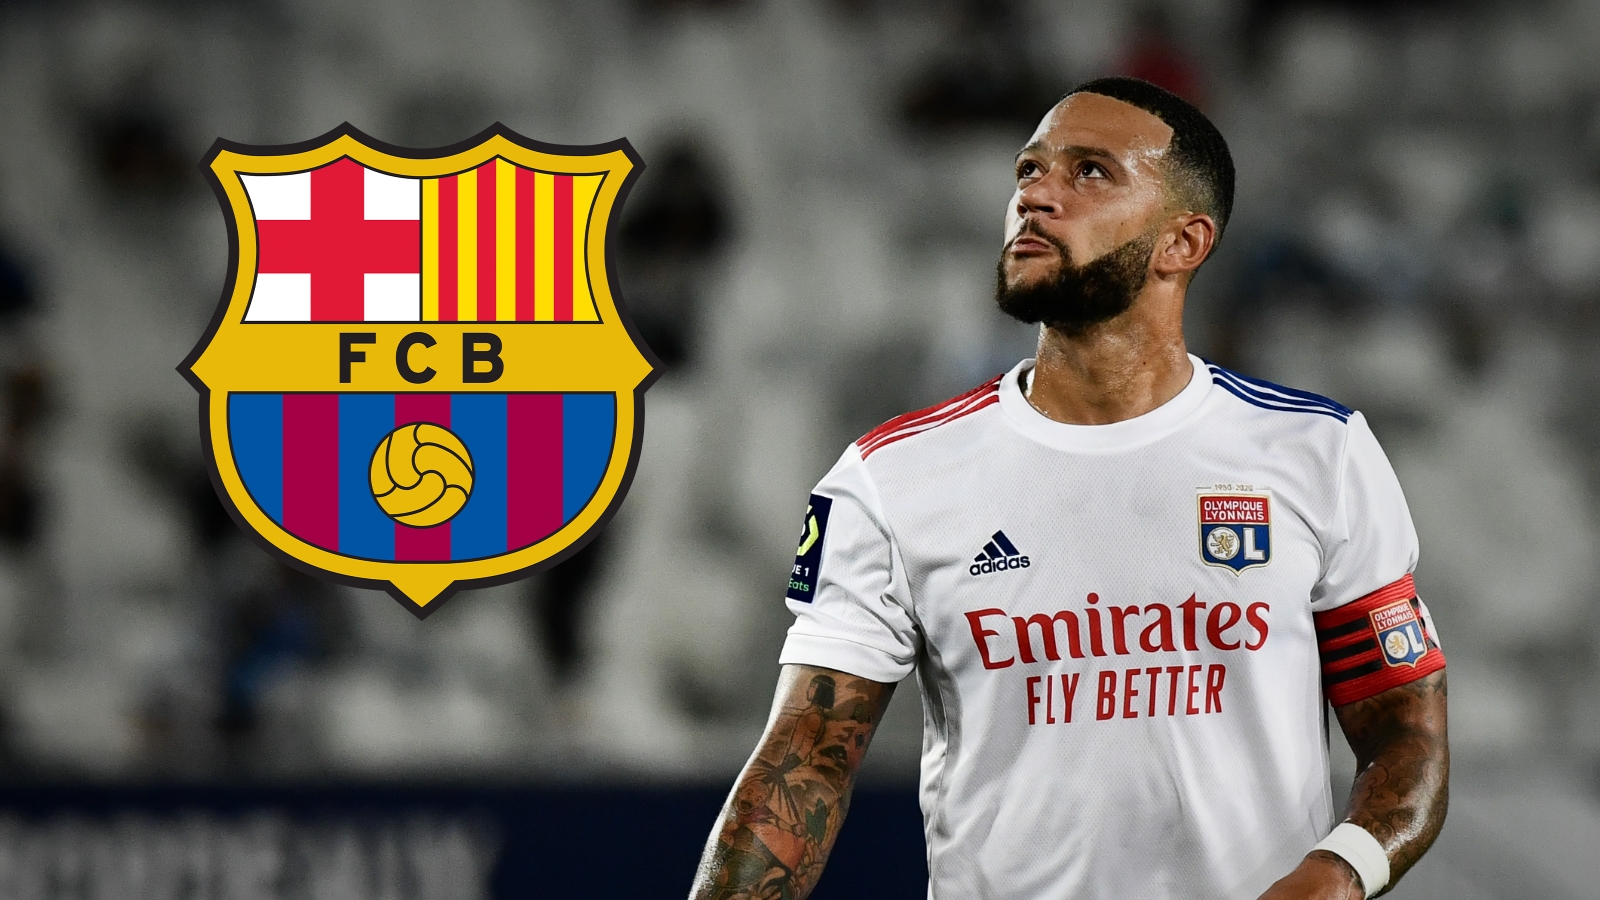 Depay is disappointed with Barcelona but will try to move there in January – Lyon president Aulas